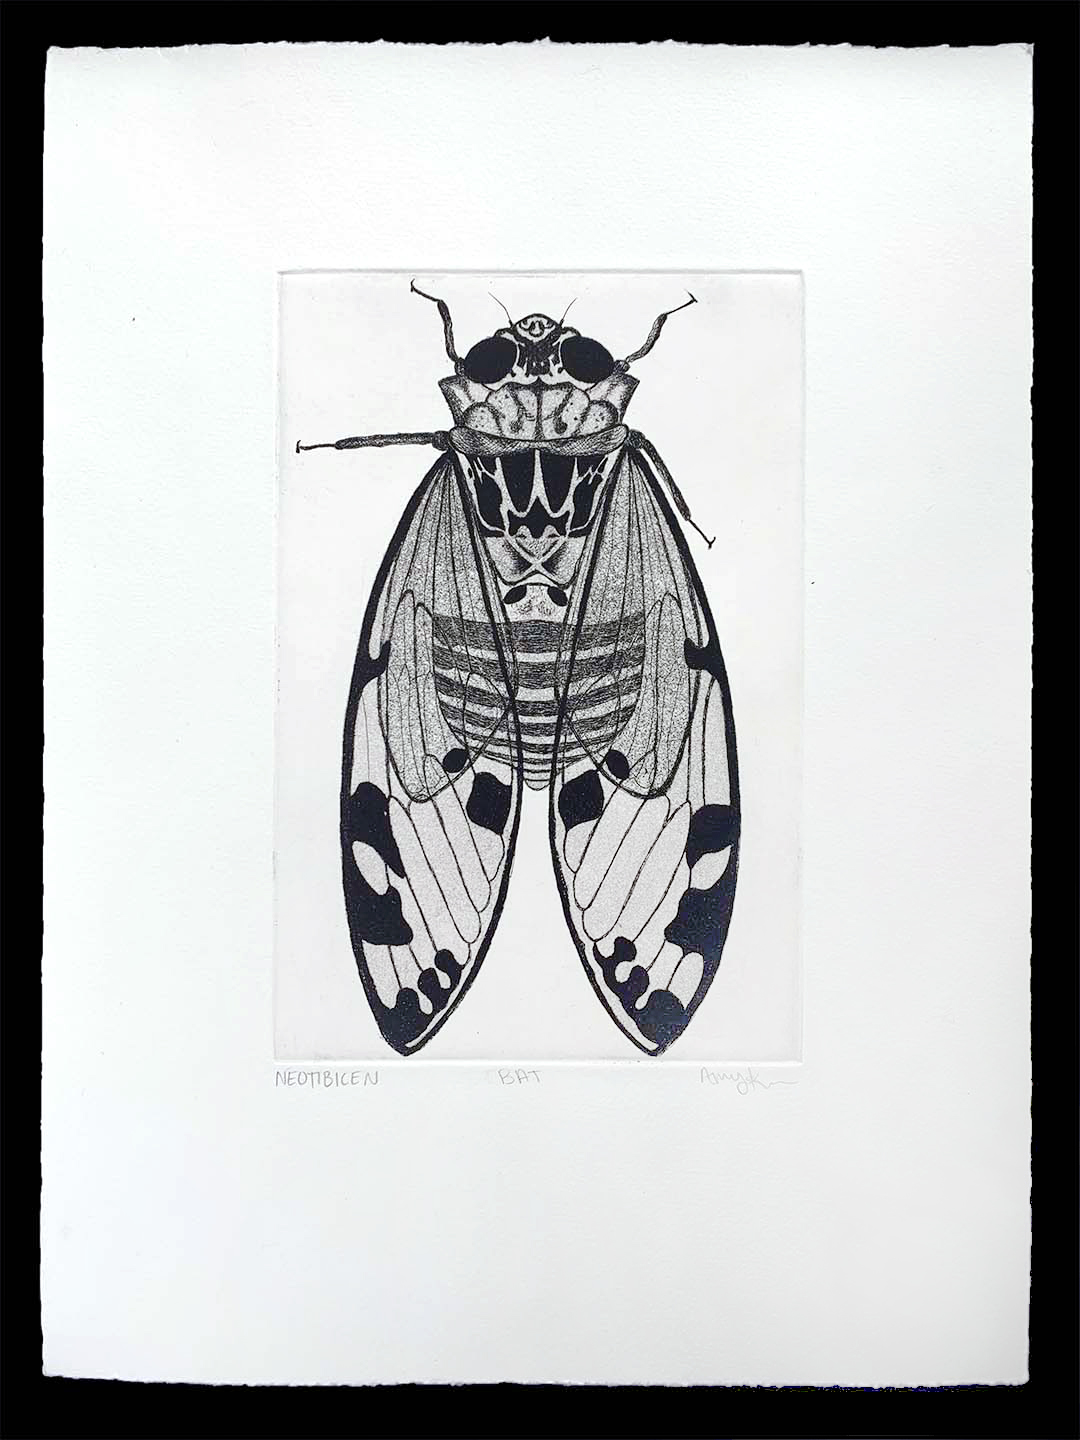 Black and white illustration of an insect with wings.